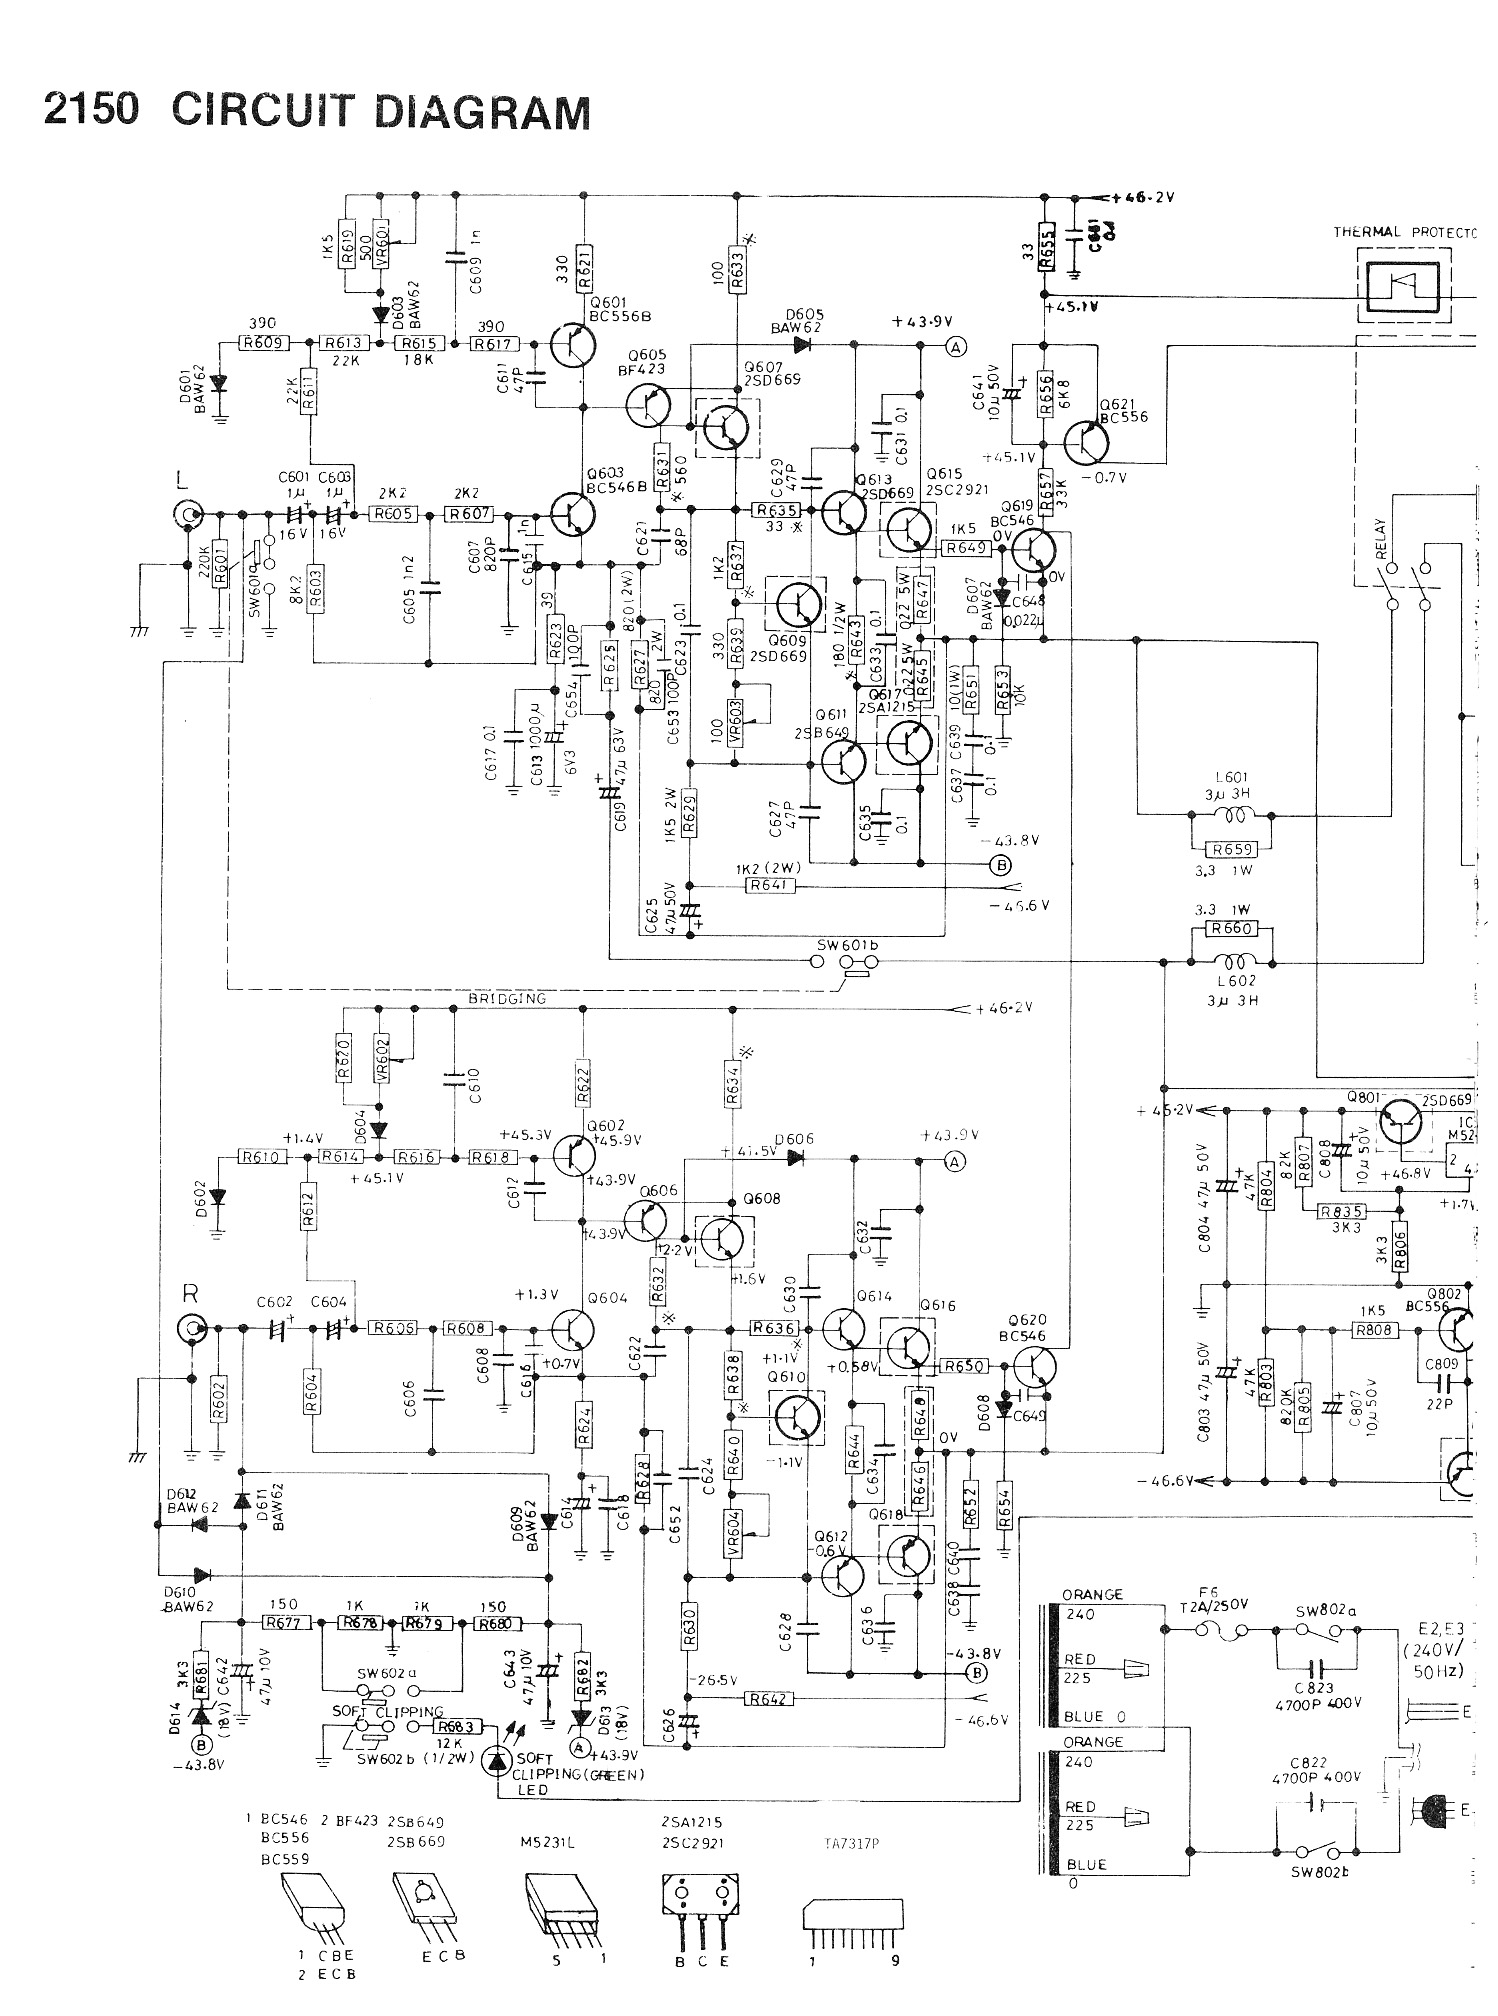 NAD 2150 Circuit Diagram for NAD2150, scanned in 2 parts.